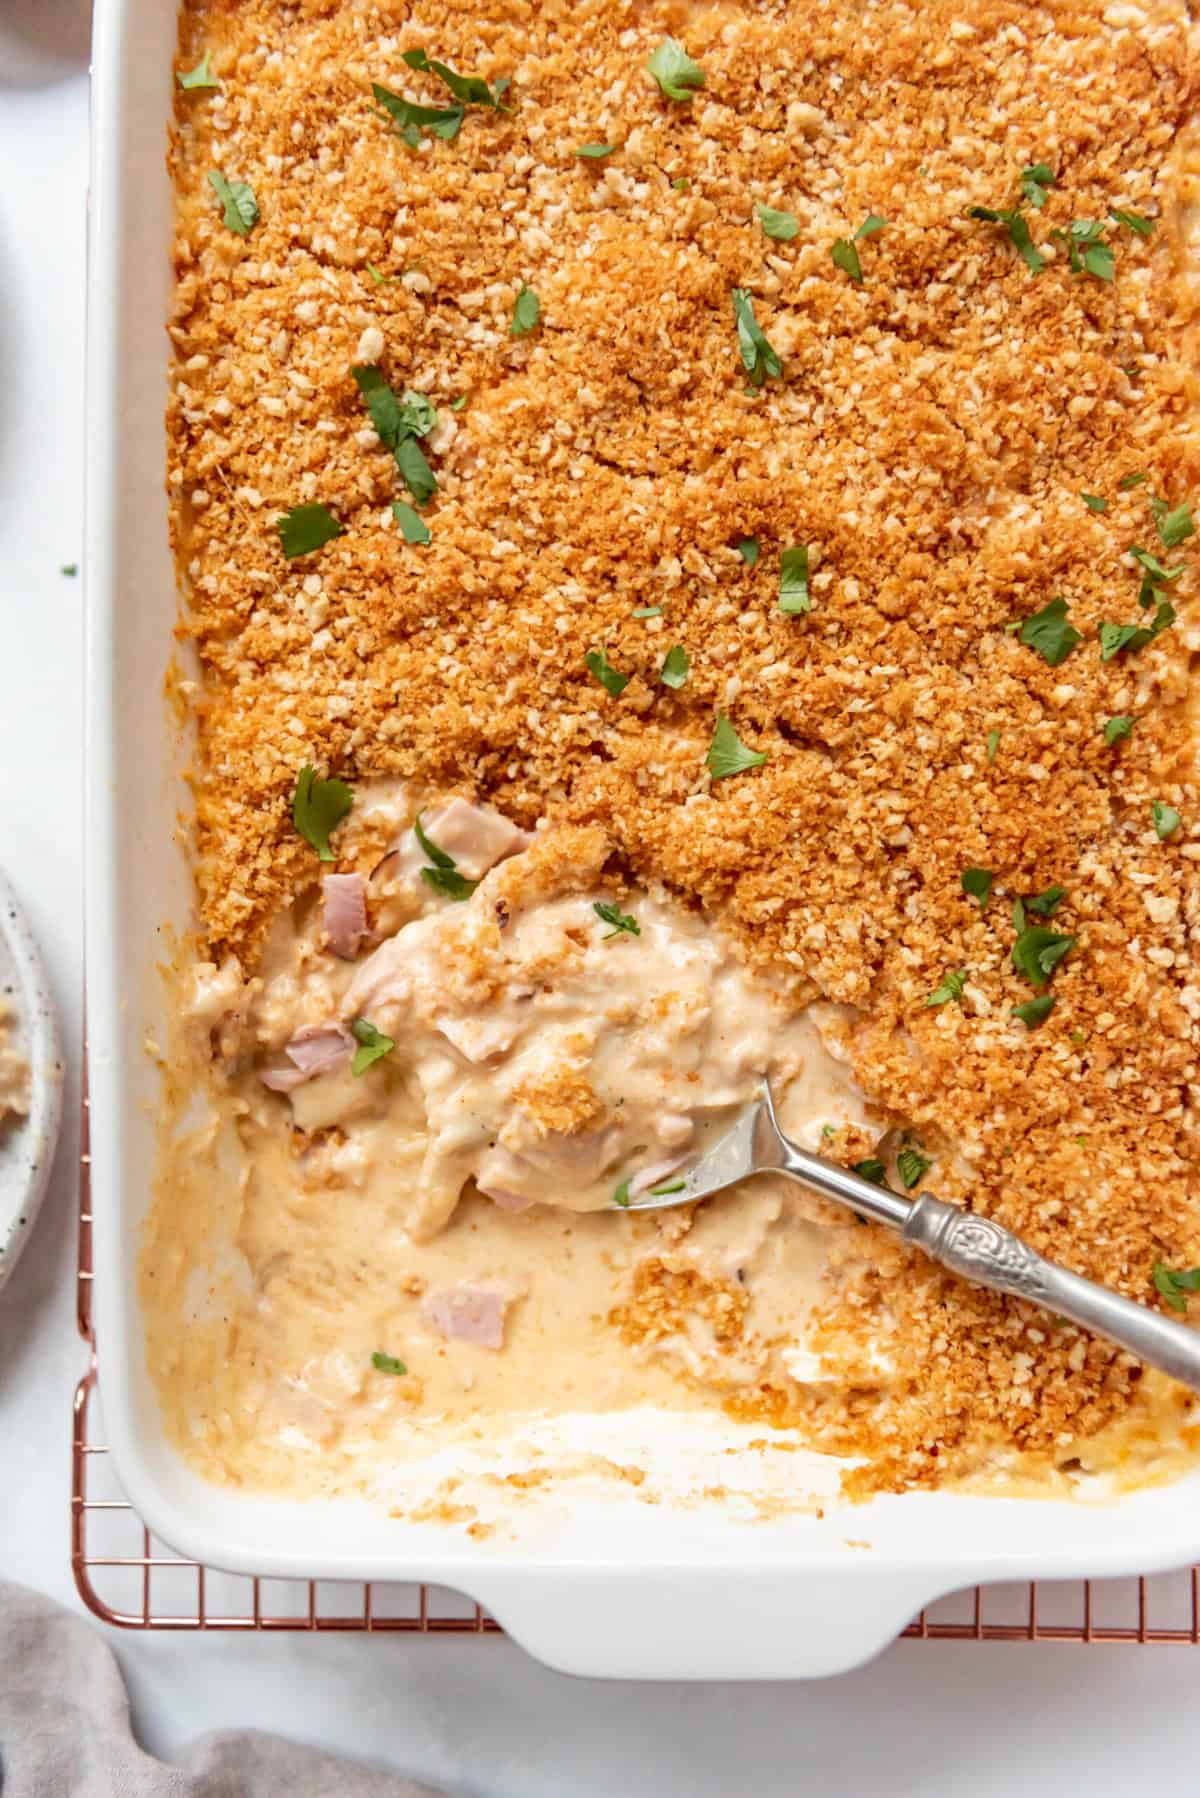 A large serving spoon in a baking dish of cordon bleu casserole.